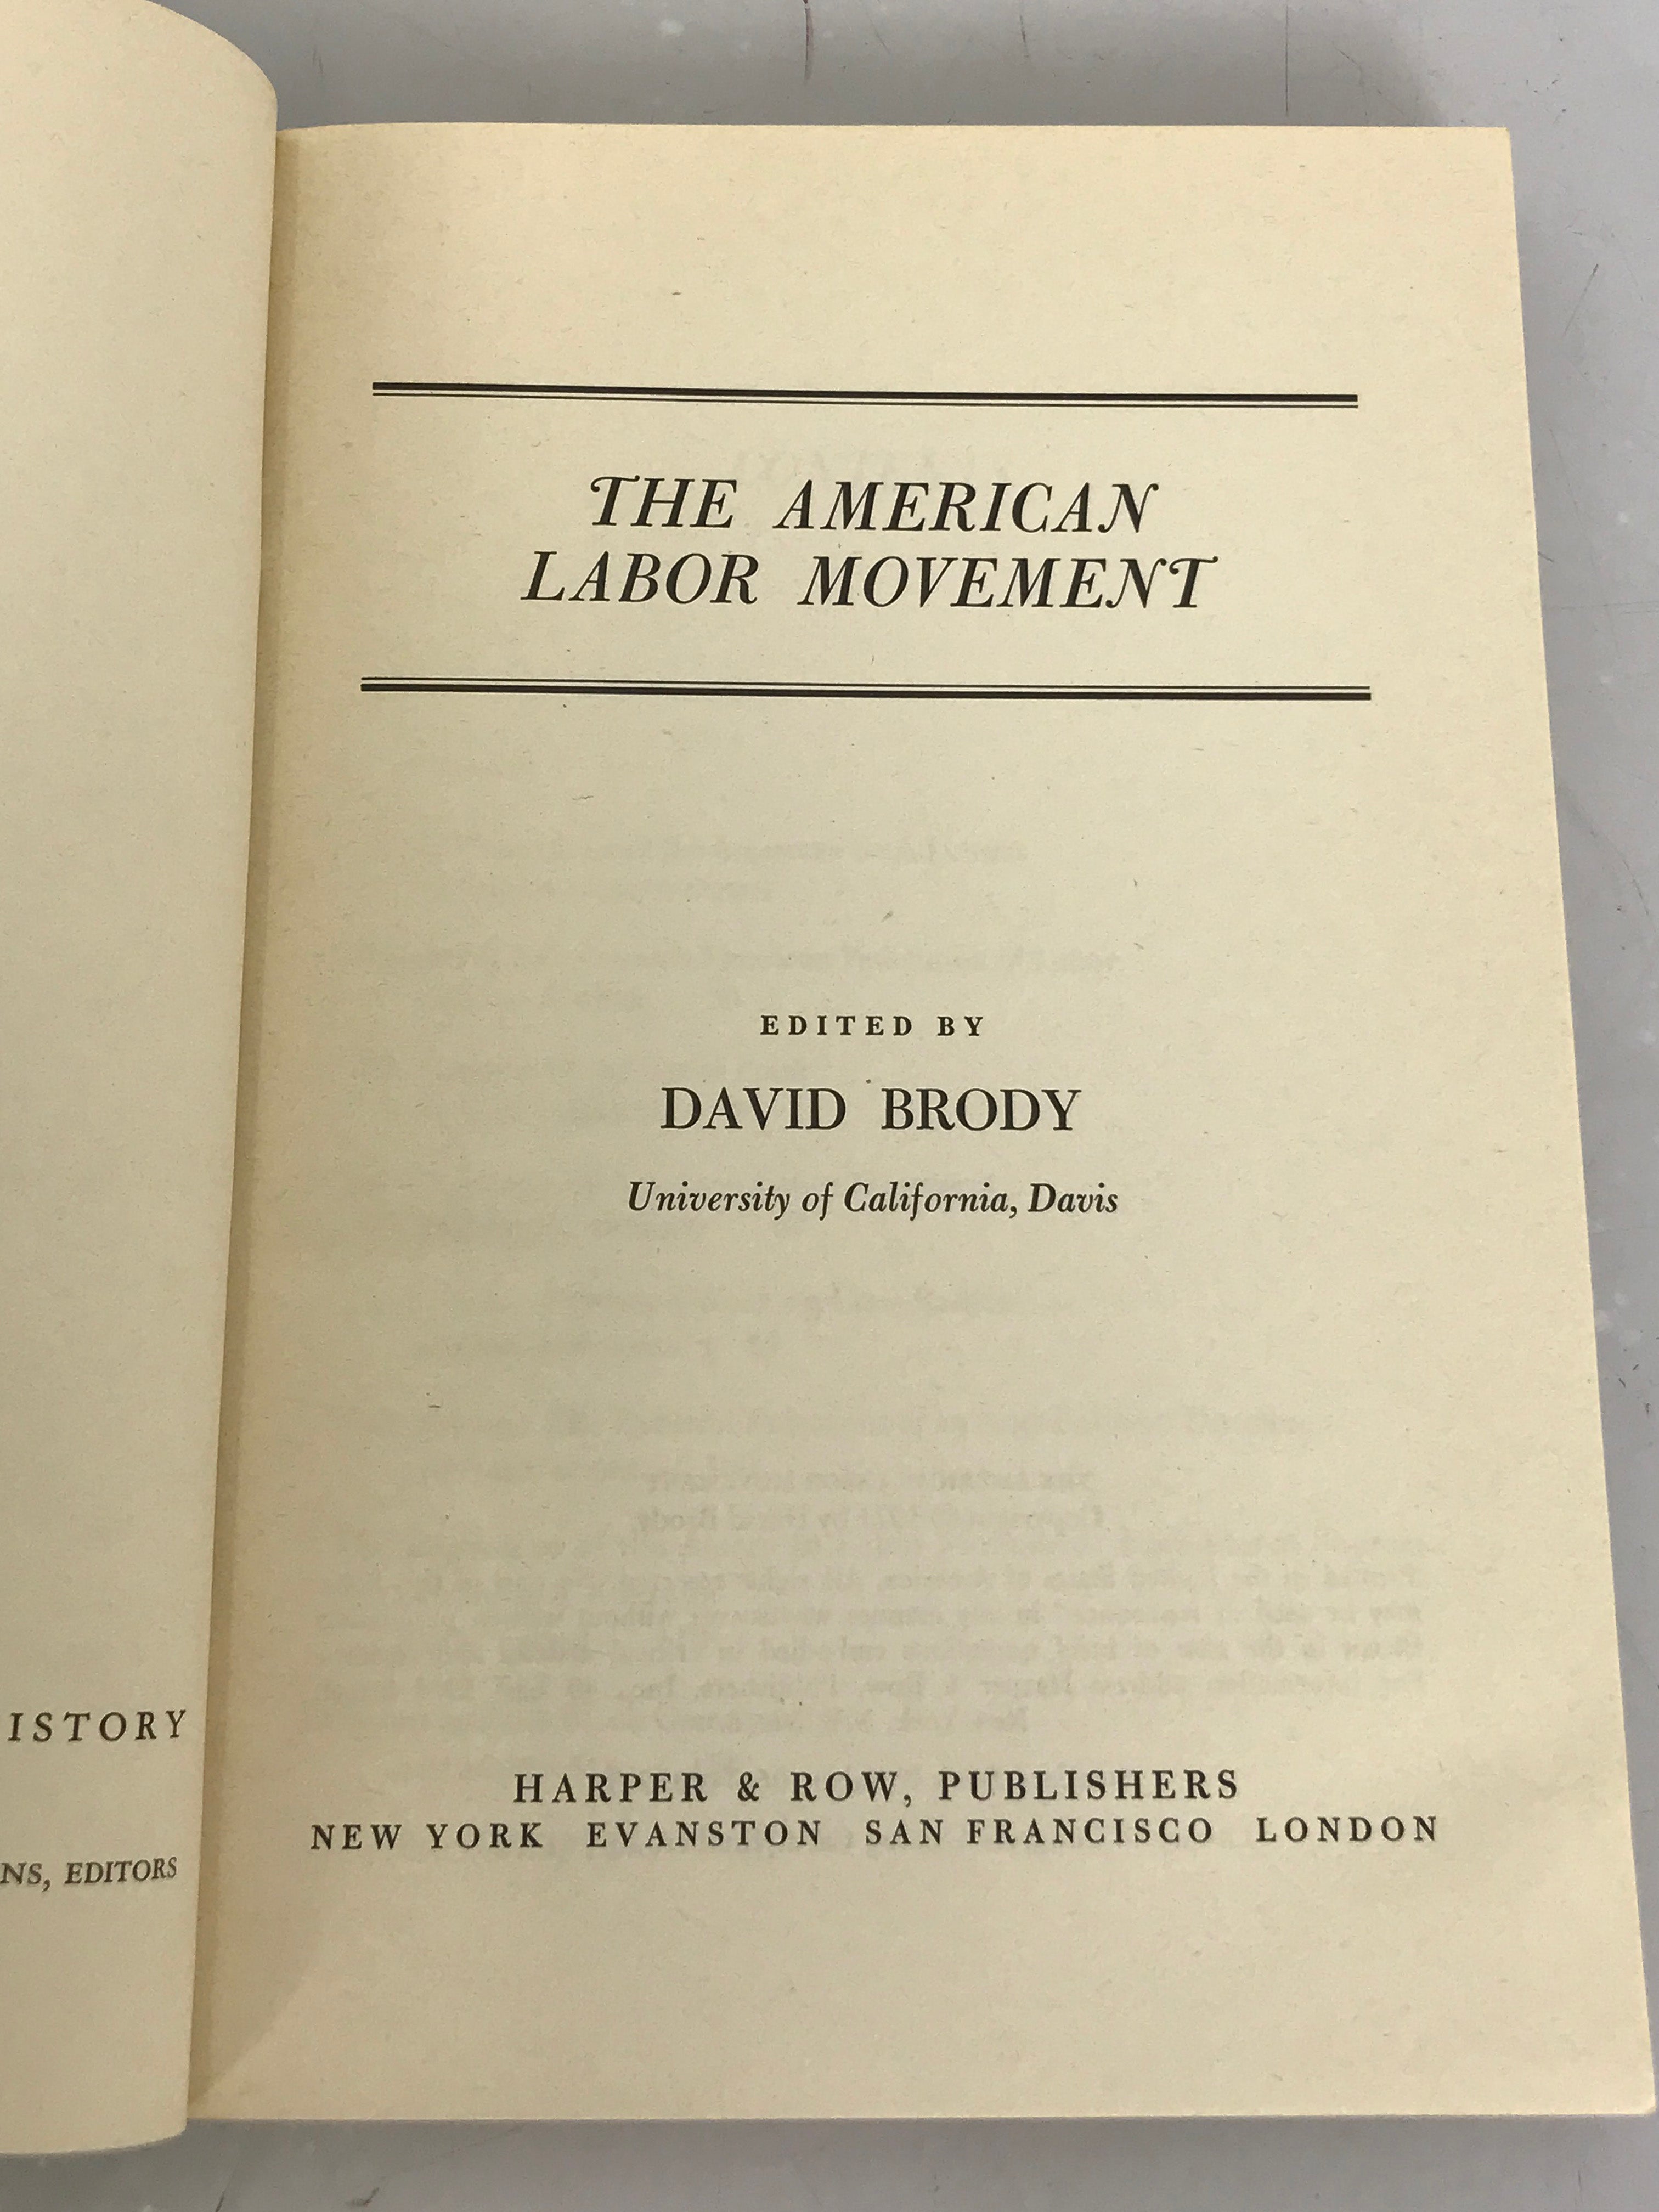 Lot of 2 David Brody Books: The American Labor Movement (1971) and Labor In Crisis the Steel Strike of 1919 (First Edition, 1965) SC